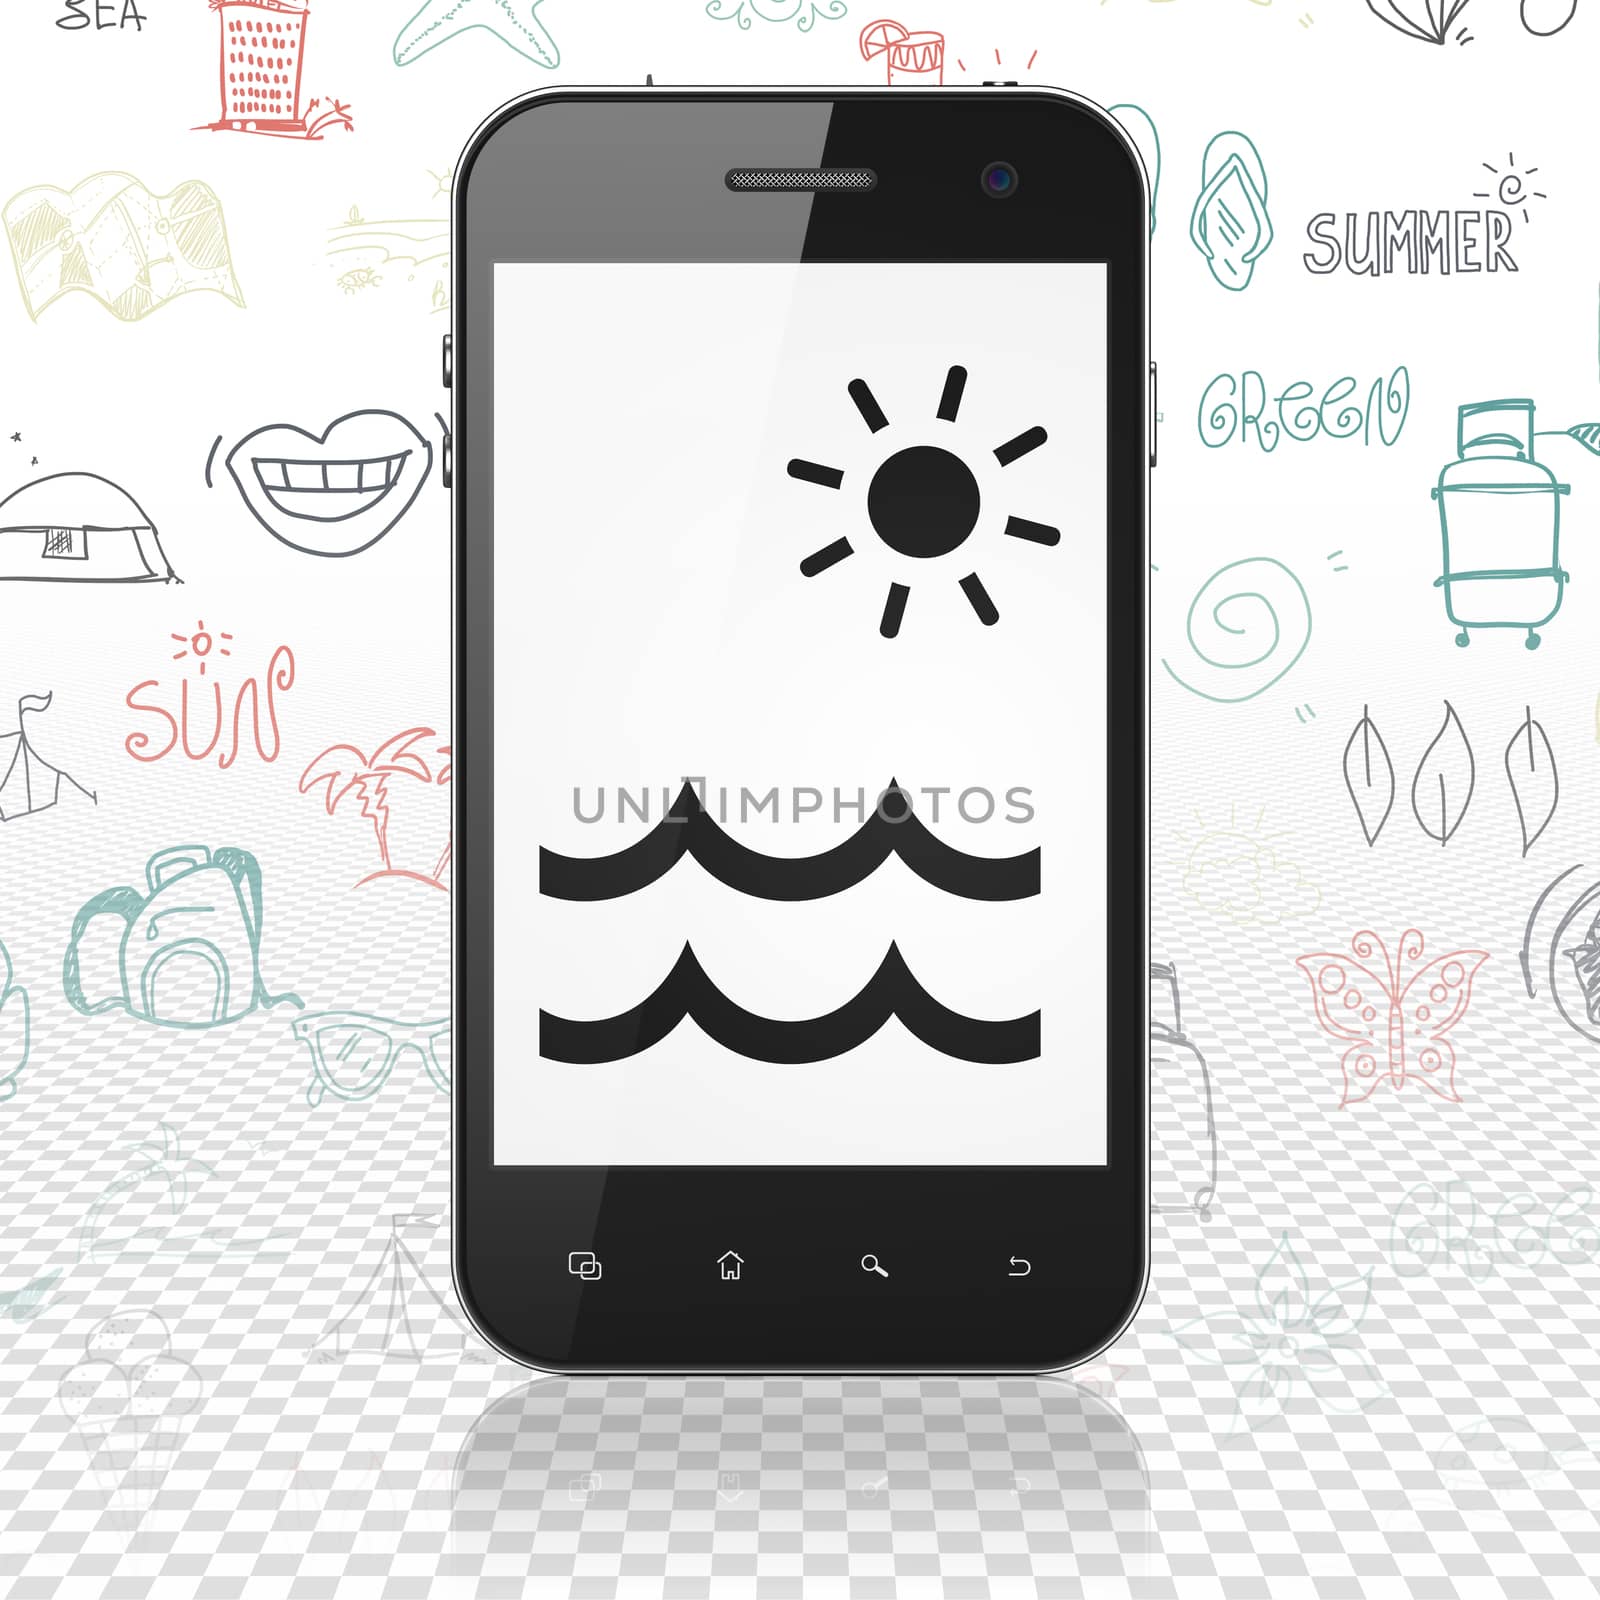 Vacation concept: Smartphone with  black Beach icon on display,  Hand Drawn Vacation Icons background, 3D rendering